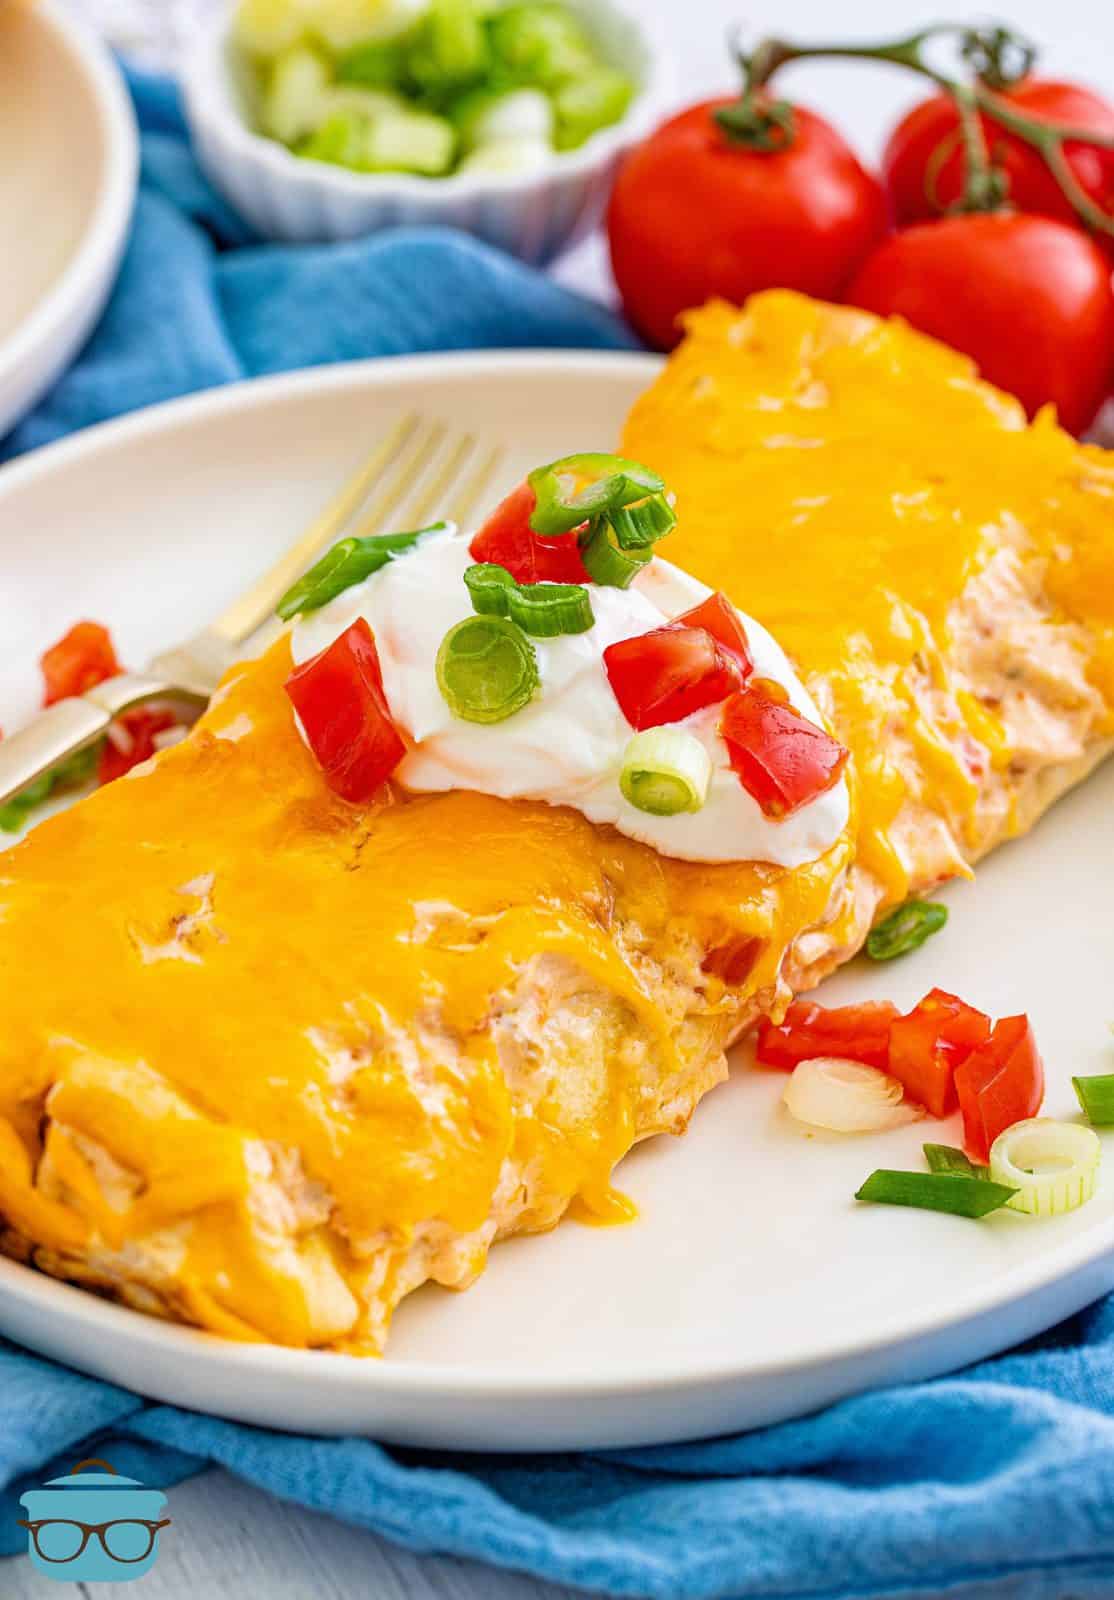 Two Ground Beef Enchiladas on plate topped with sour cream, tomatoes and green onion.